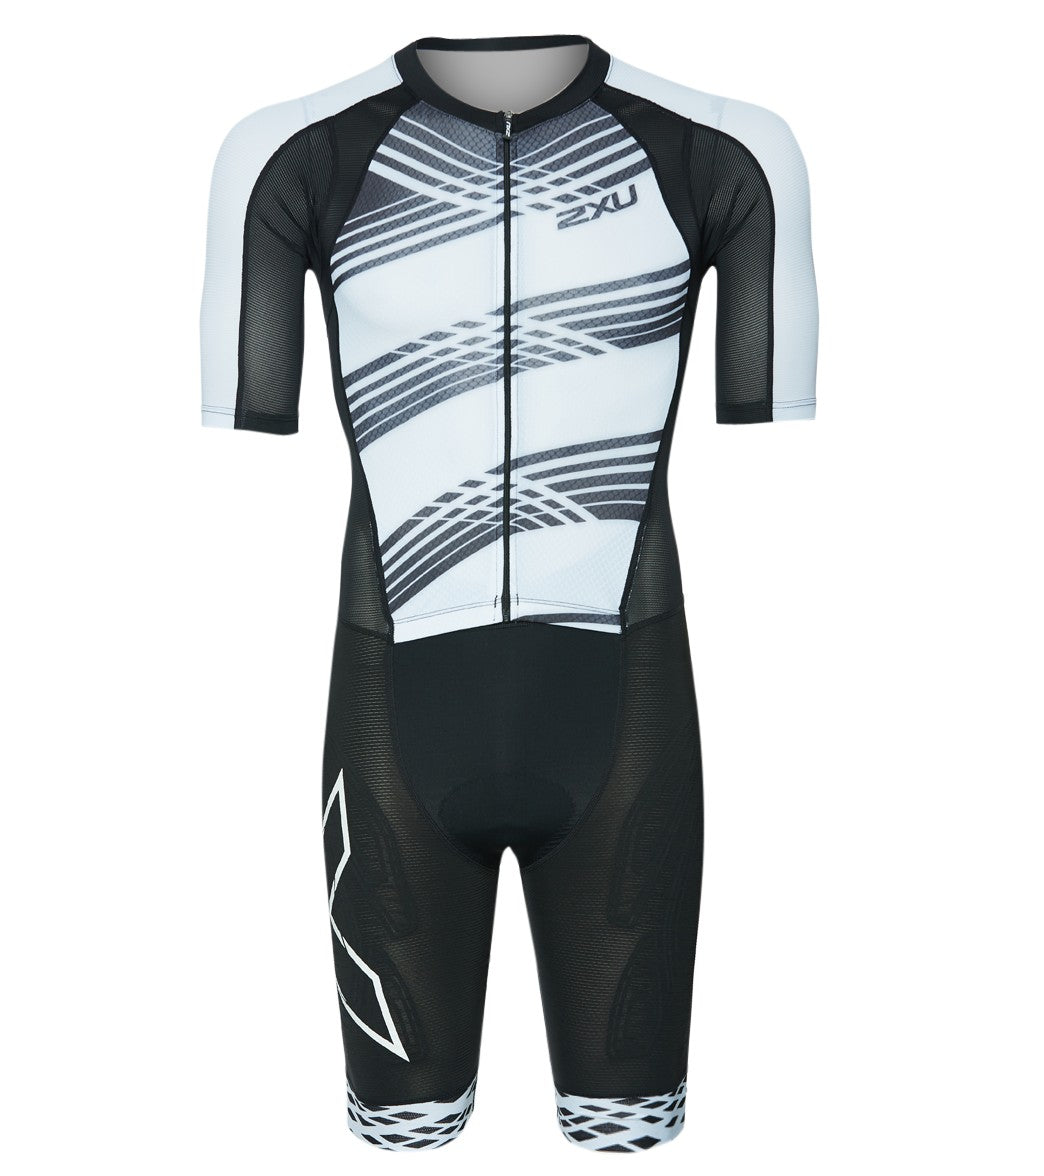 2Xu Men's Compression Full Zip Sleeved Tri Suit - Black/Black White Lines Xs Size X-Small - Swimoutlet.com